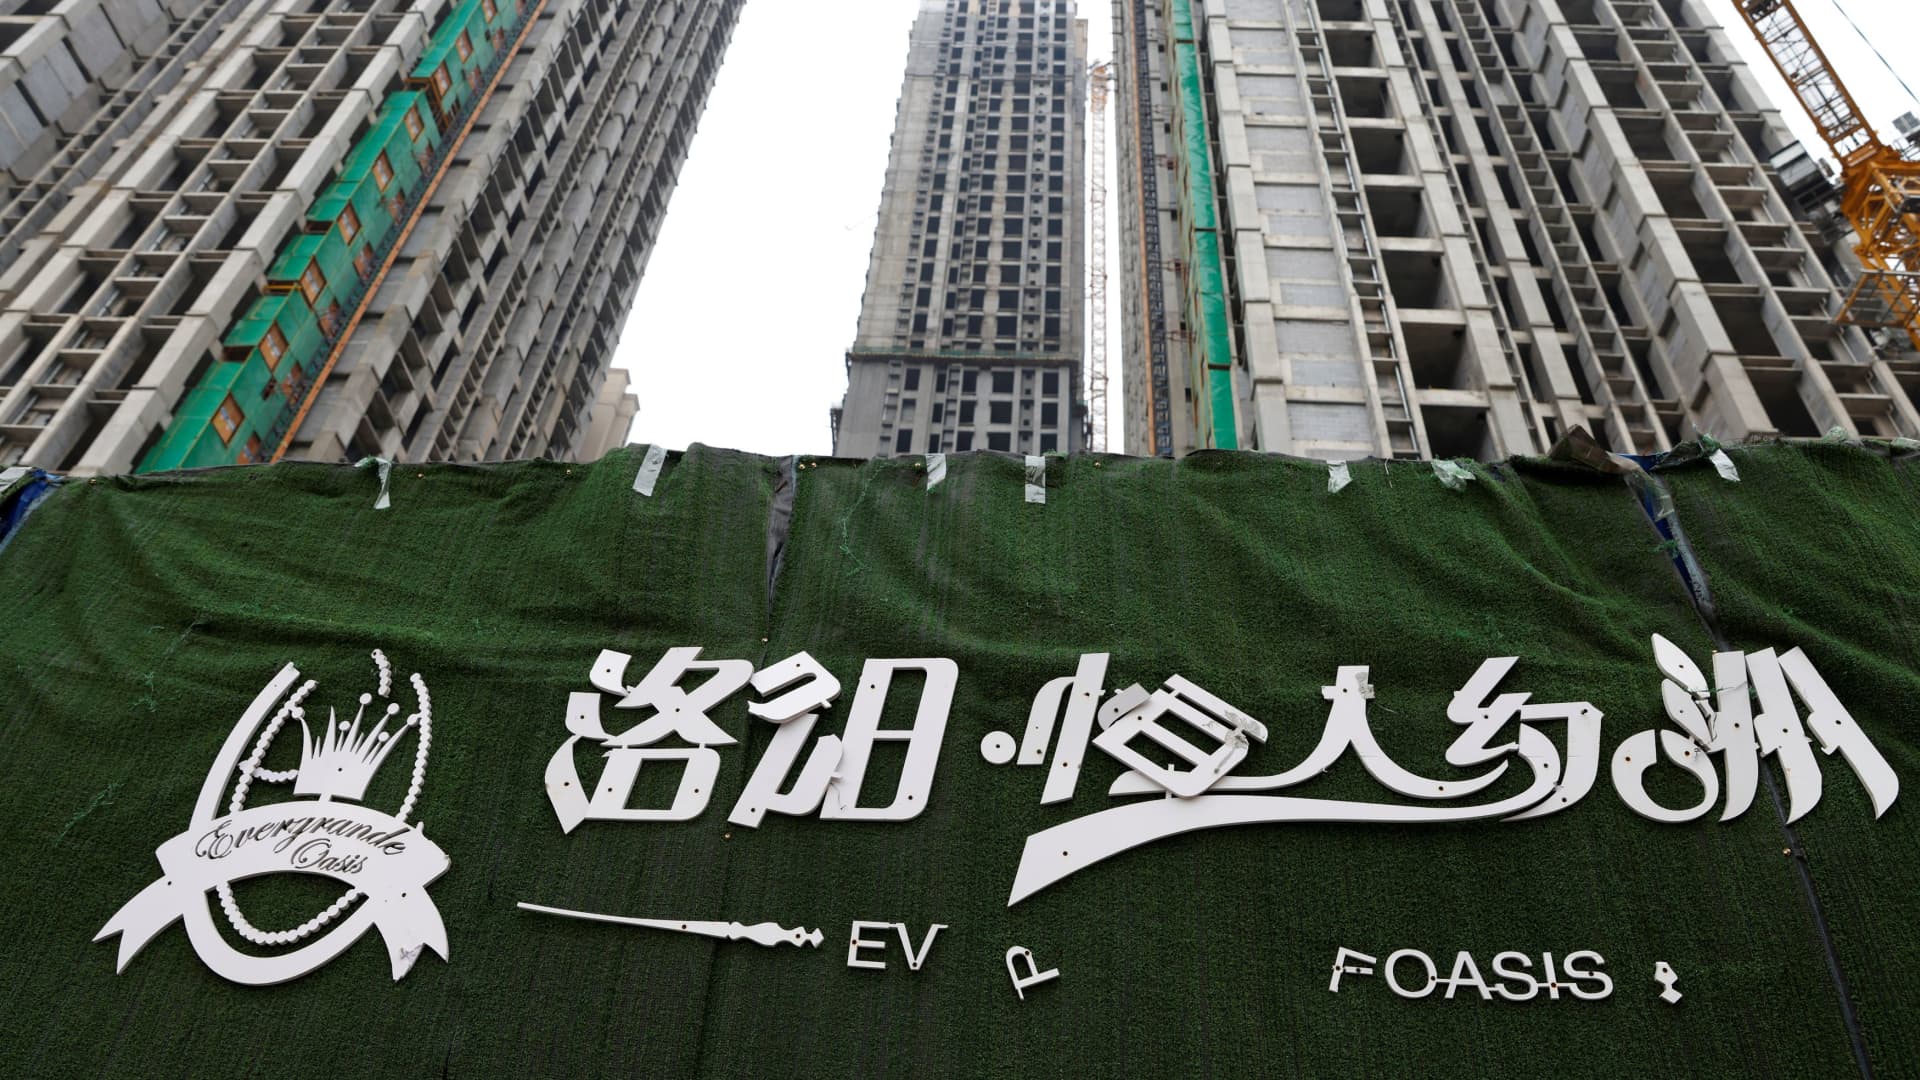 A peeling logo of the Evergrande Oasis, a housing complex developed by Evergrande Group, is pictured outside the construction site where the residential buildings stand unfinished, in Luoyang, China September 16, 2021. Picture taken September 16, 2021.